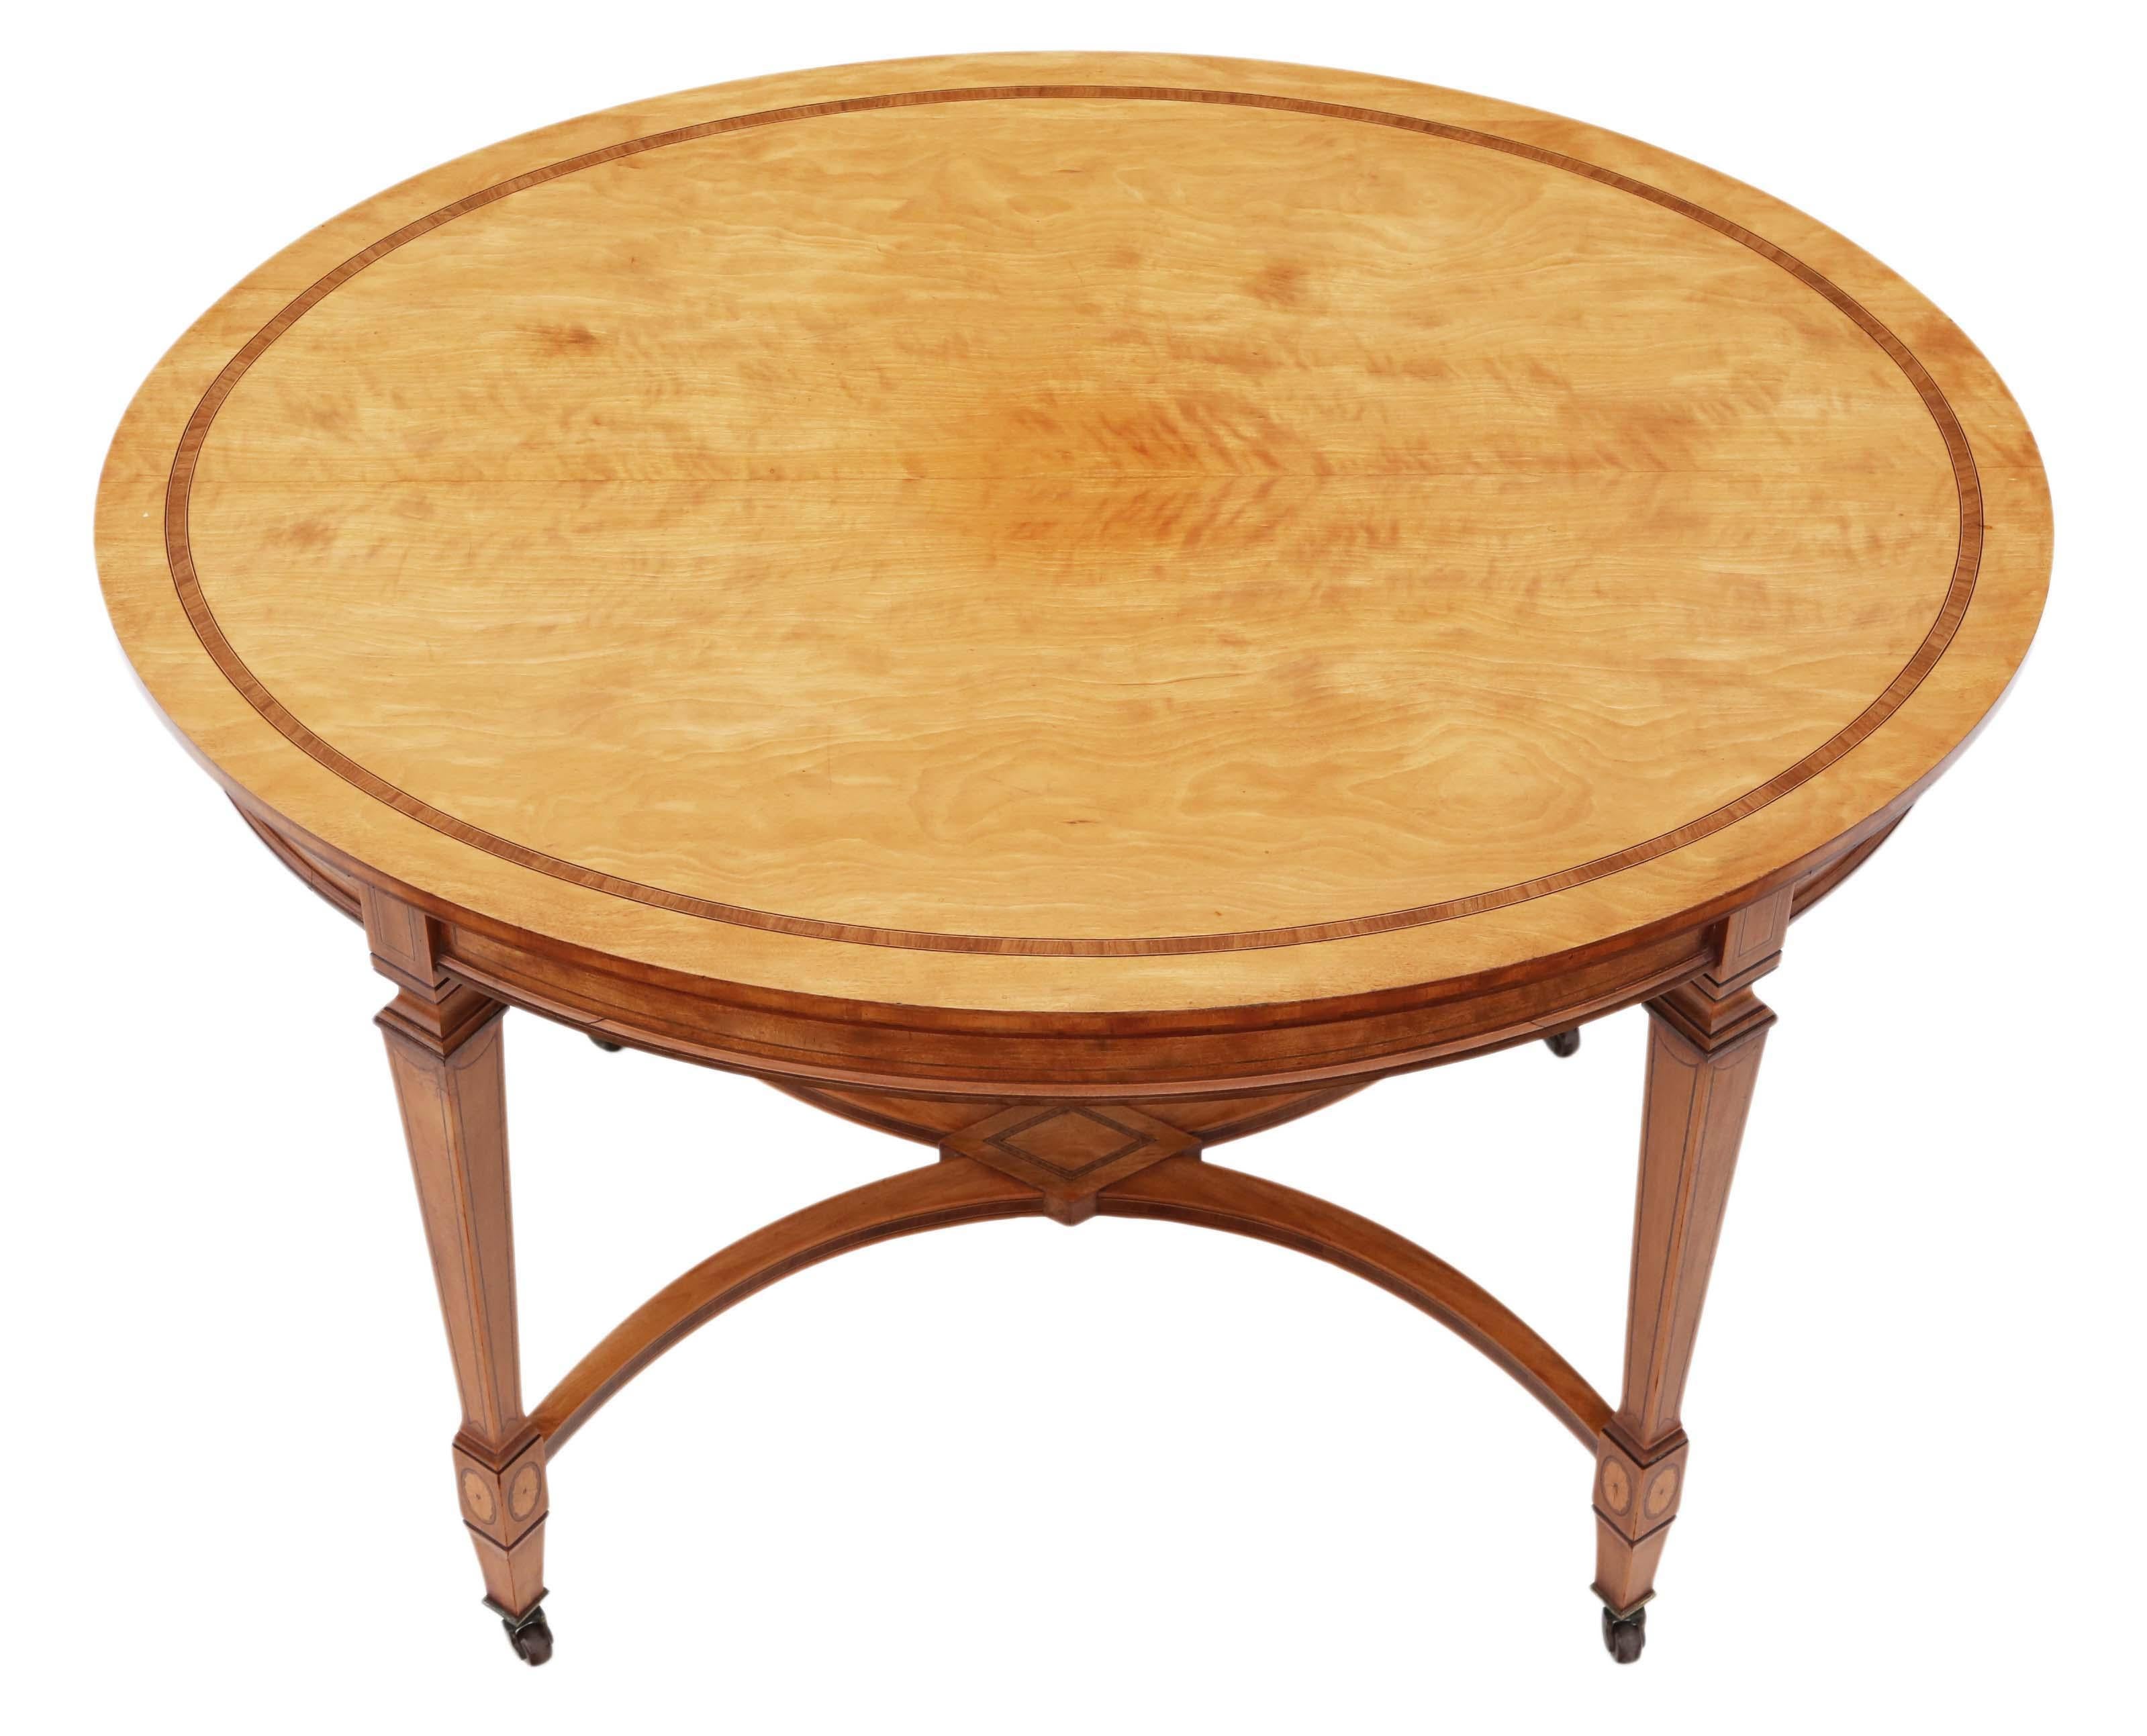 Fine Quality Victorian Inlaid Satinwood Centre Table from circa 1880-1900, Antiq For Sale 3